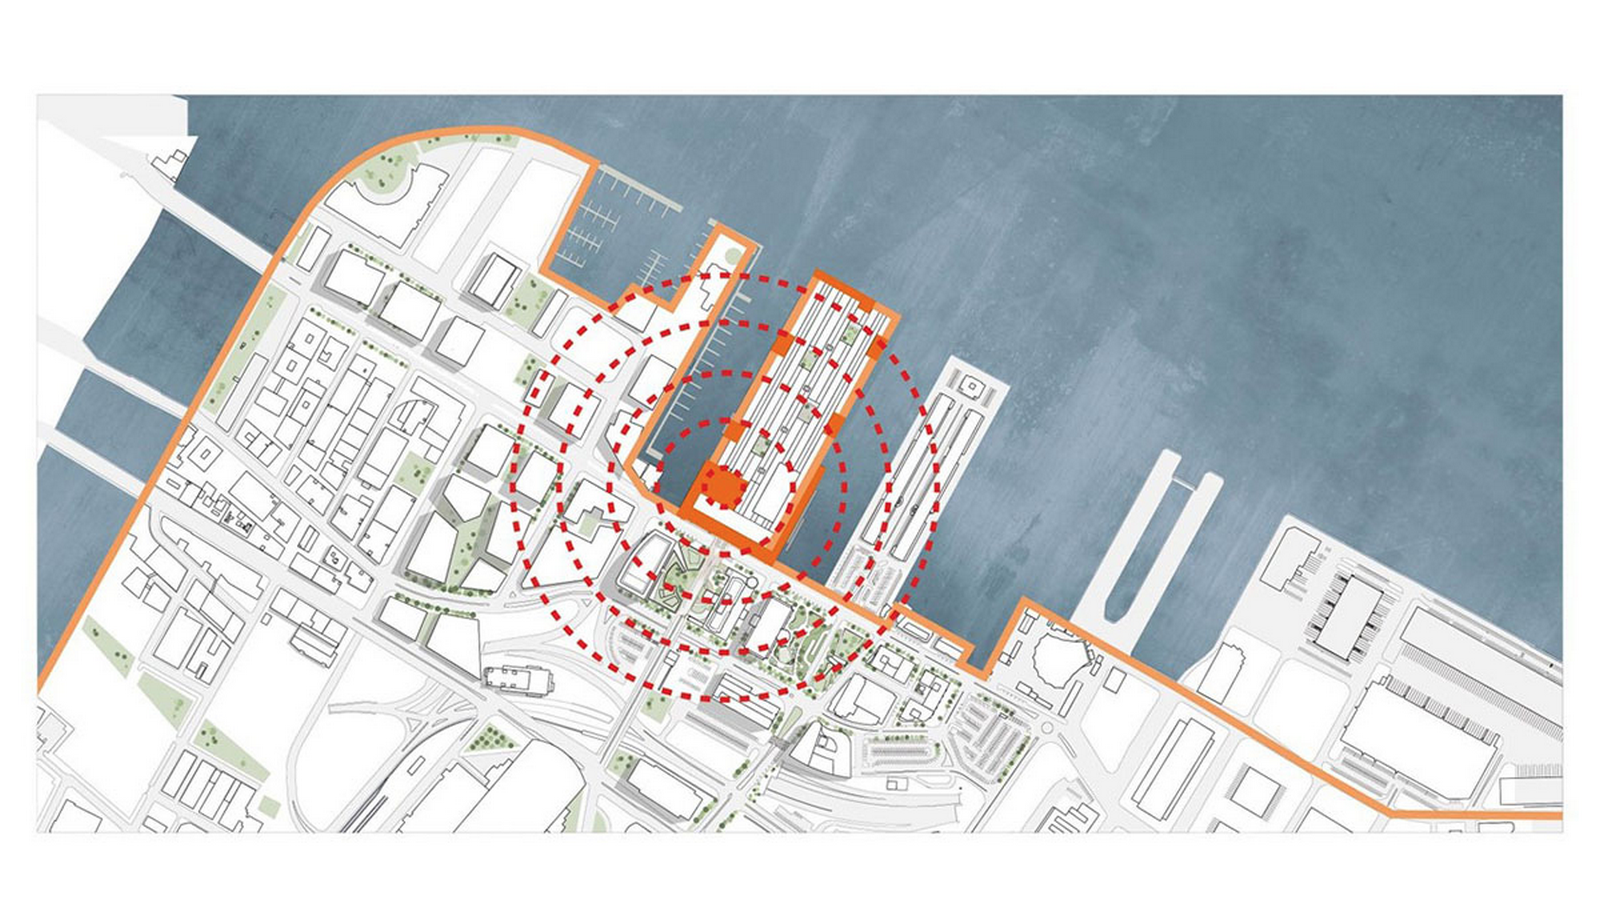 Construction begins on redesigning of Boston's Seaport World Trade Center by Schmidt Hammer Lassen Architects - Sheet3